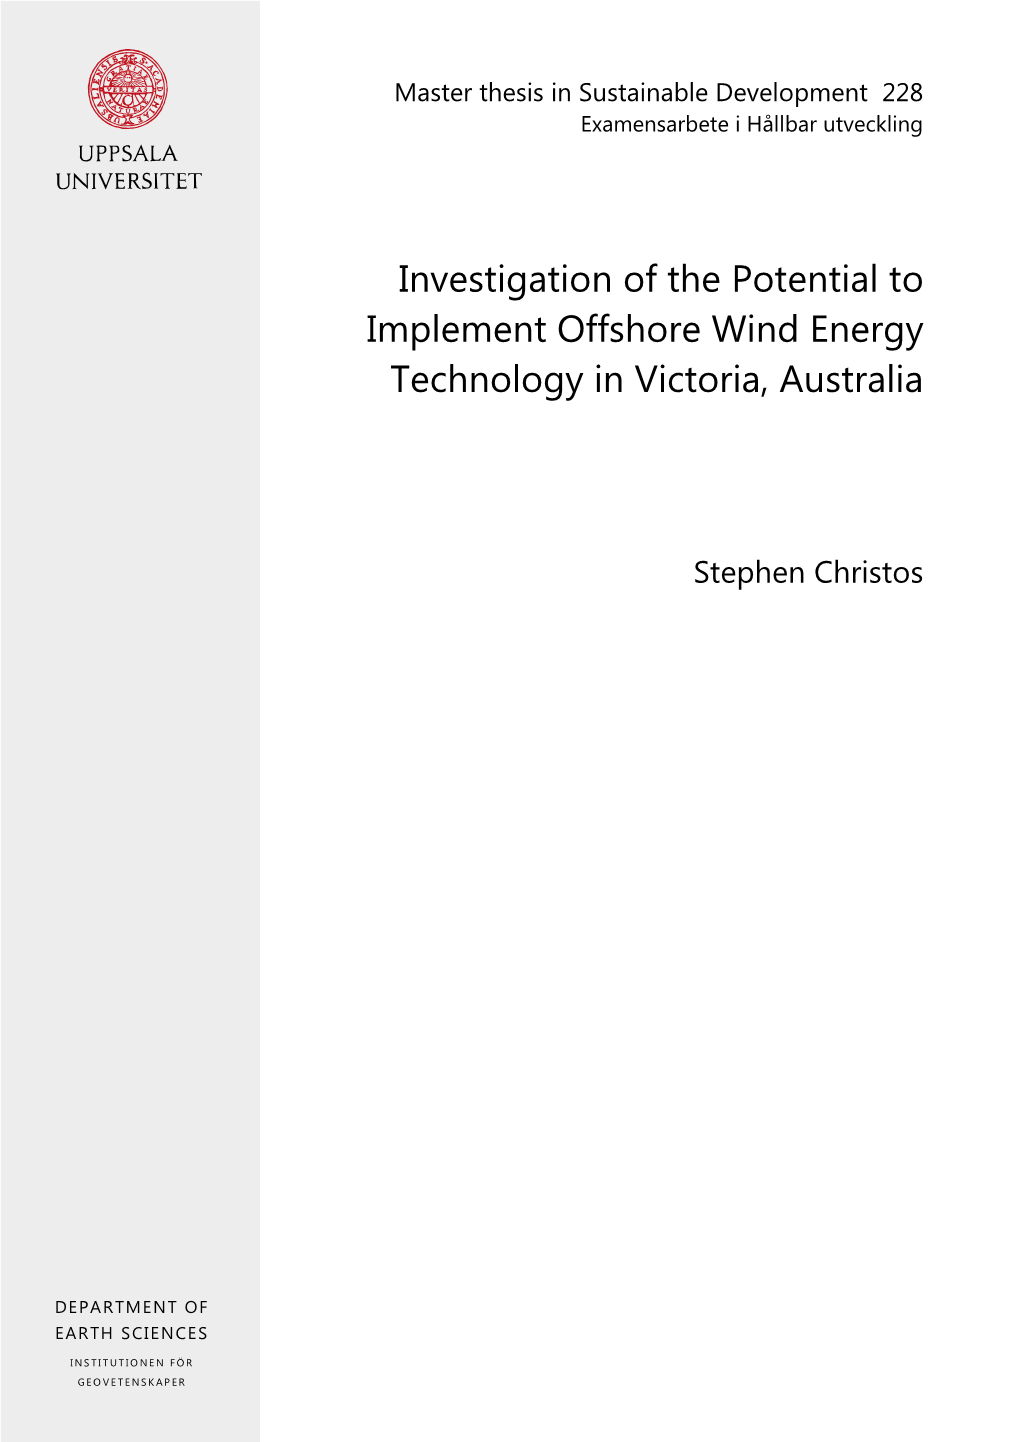 Investigation of the Potential to Implement Offshore Wind Energy Technology in Victoria, Australia